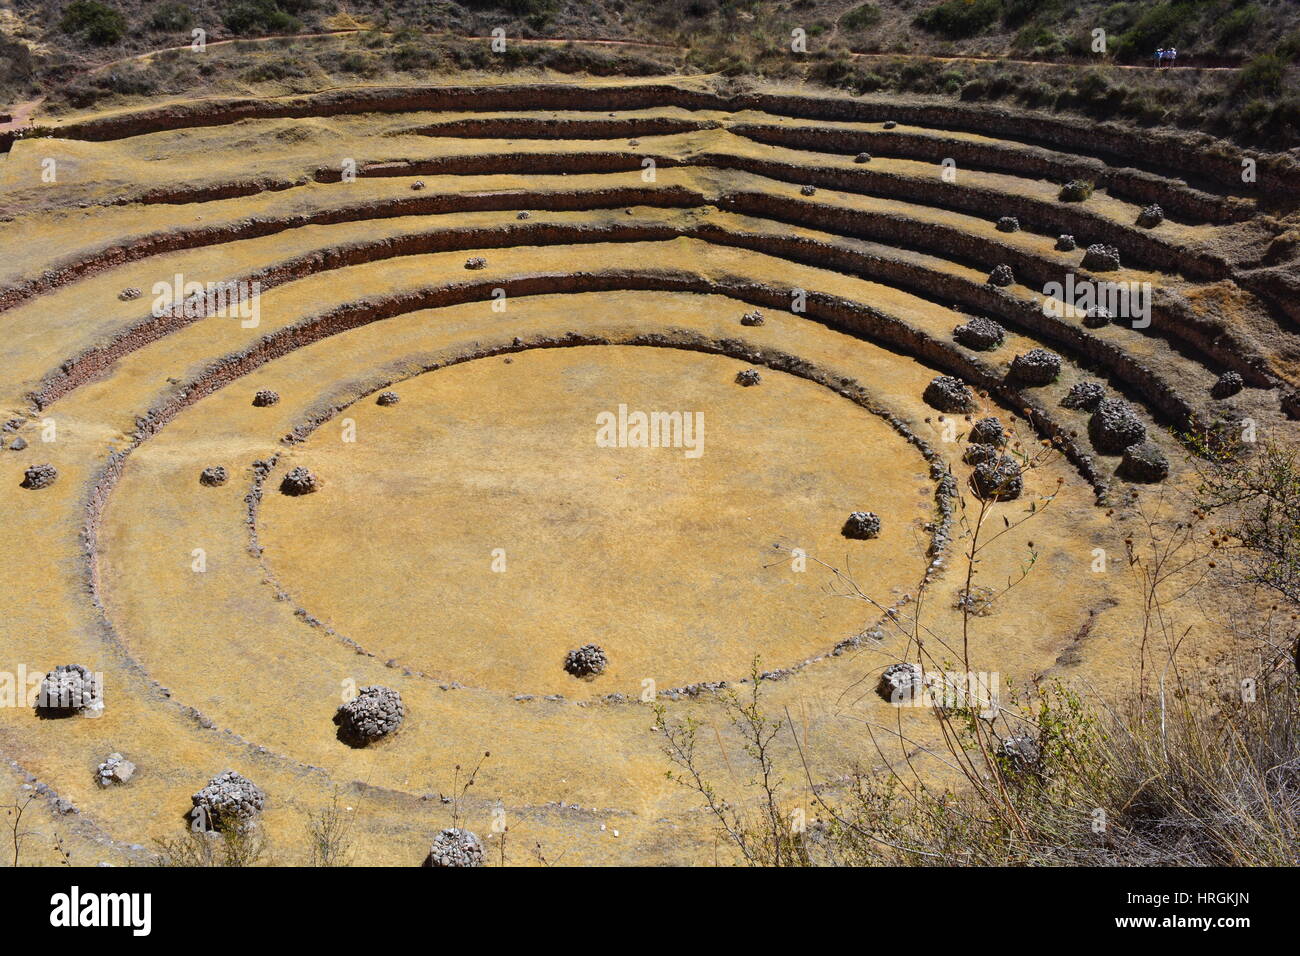 Picture of the Moray, an ancient havest center created by the Inca civilization, in Cusco, Peru Stock Photo